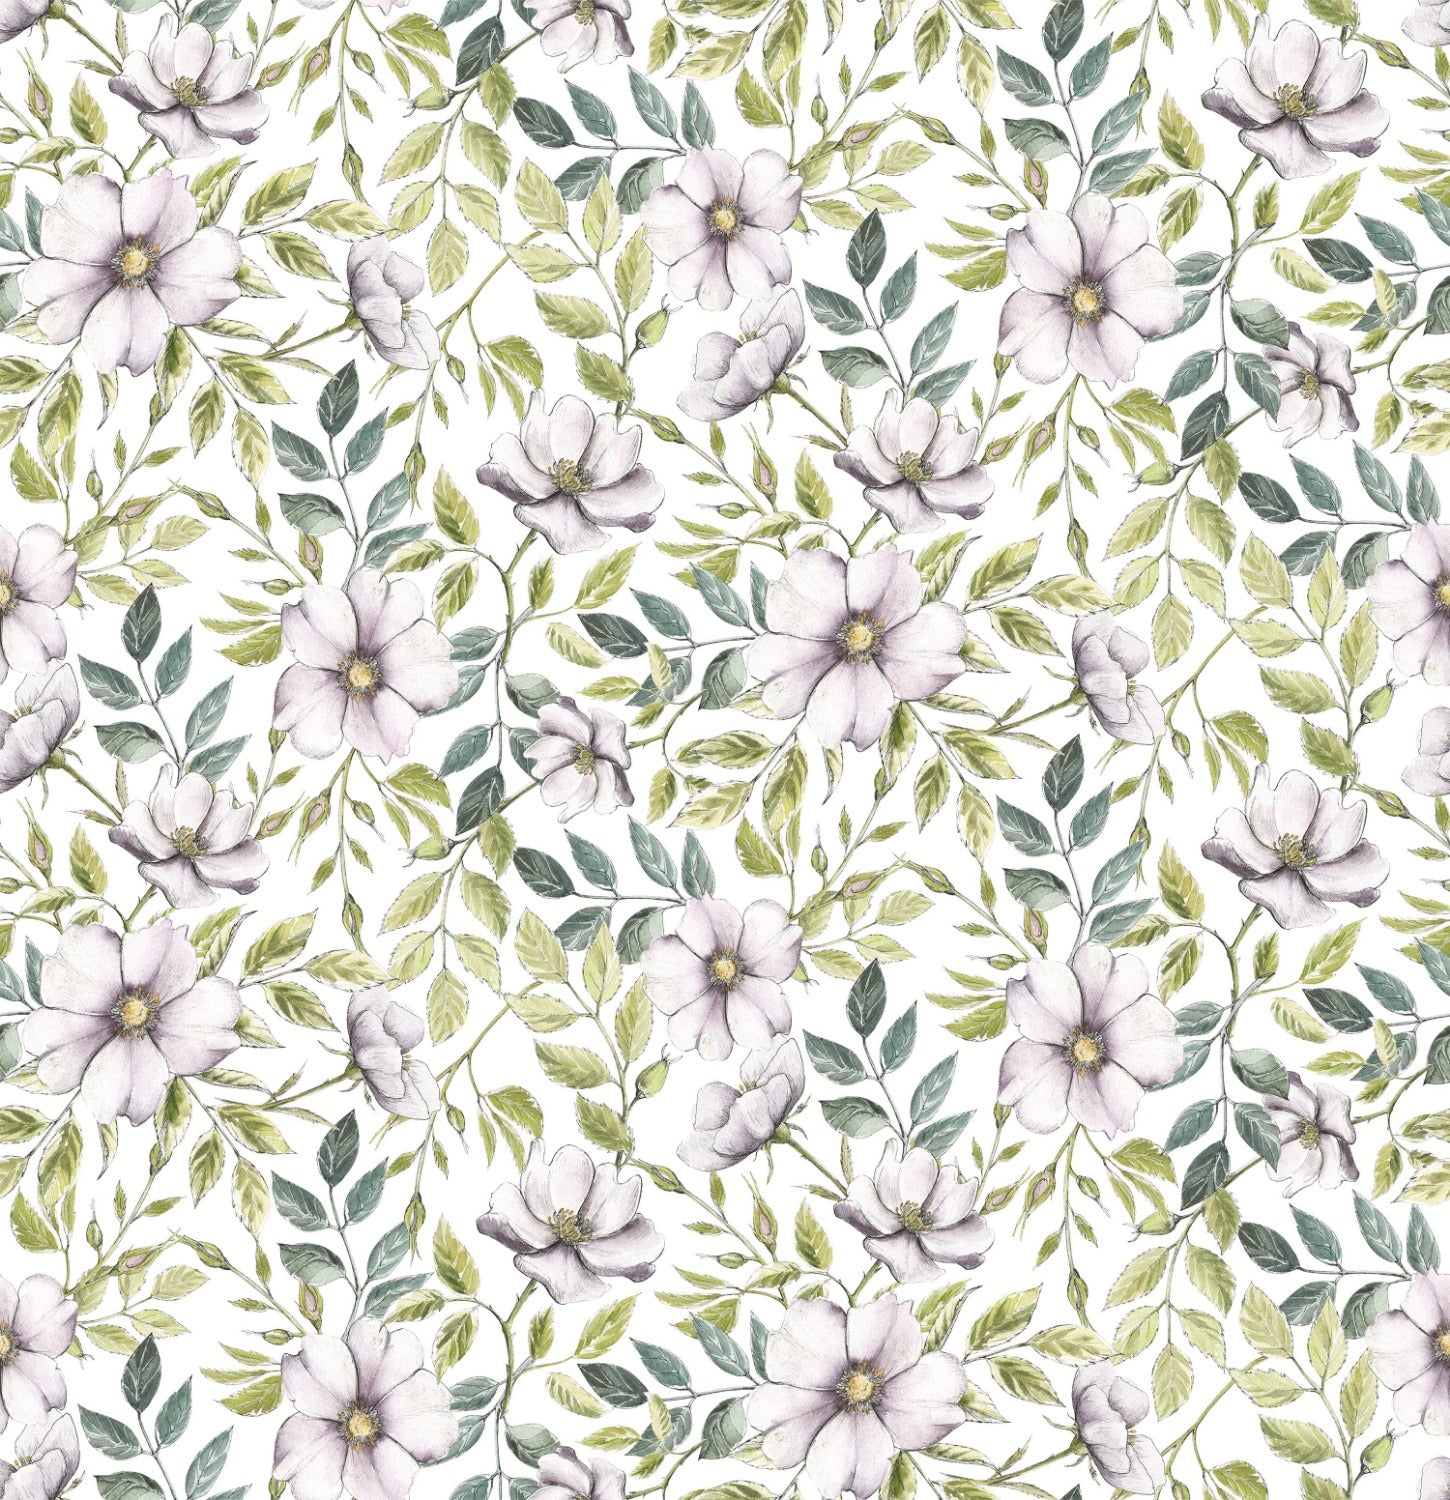 Seamless pattern of Botanical Wildflower Wallpaper with lush greenery and subtle purple blooms